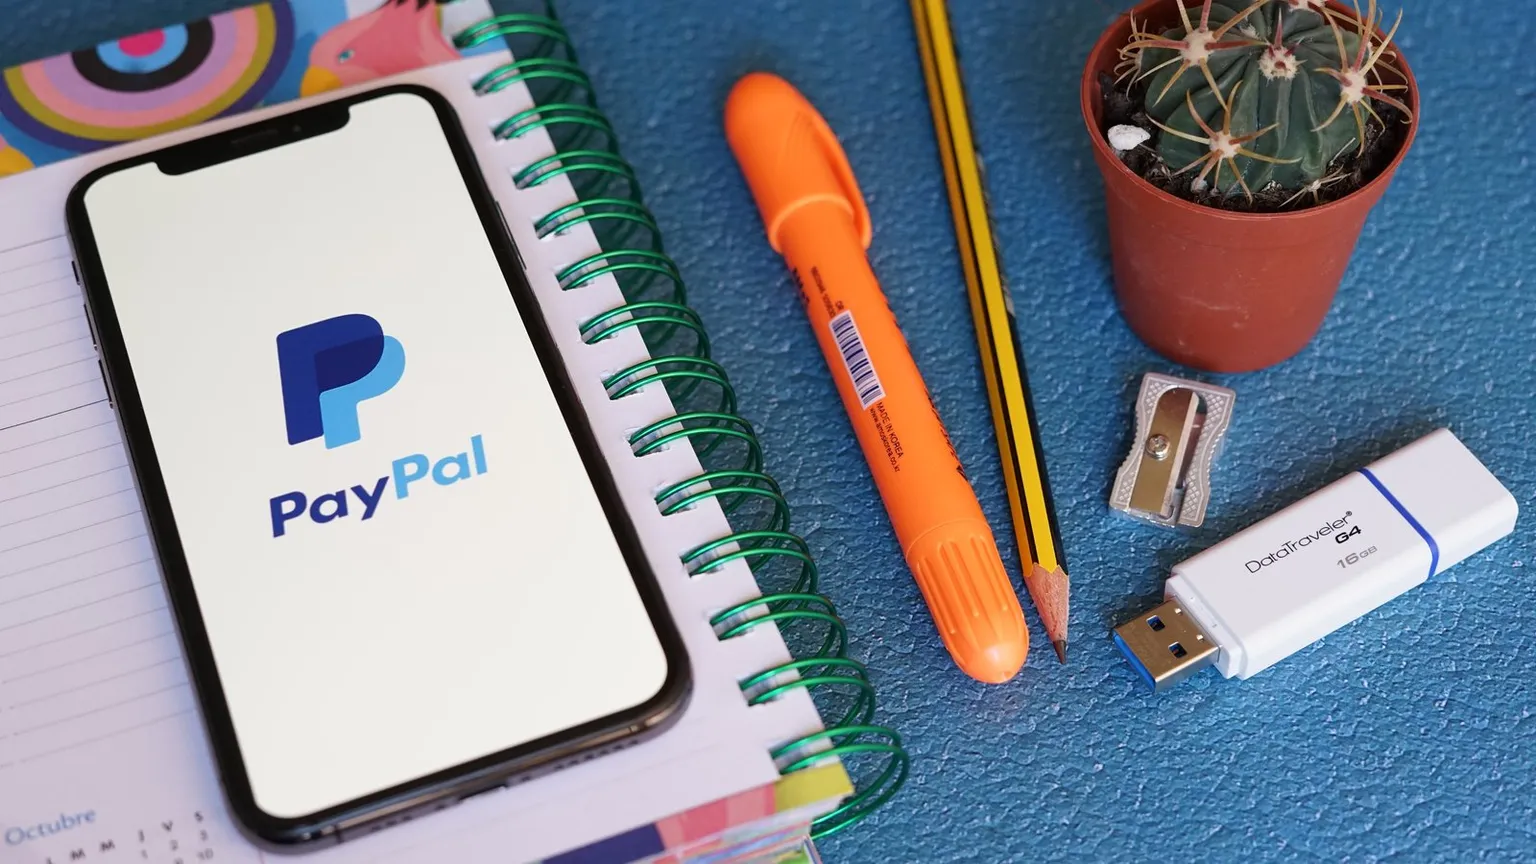 Paypal App on iPhone Screen on Opened Agenda Book with Stationery on a Blue Table